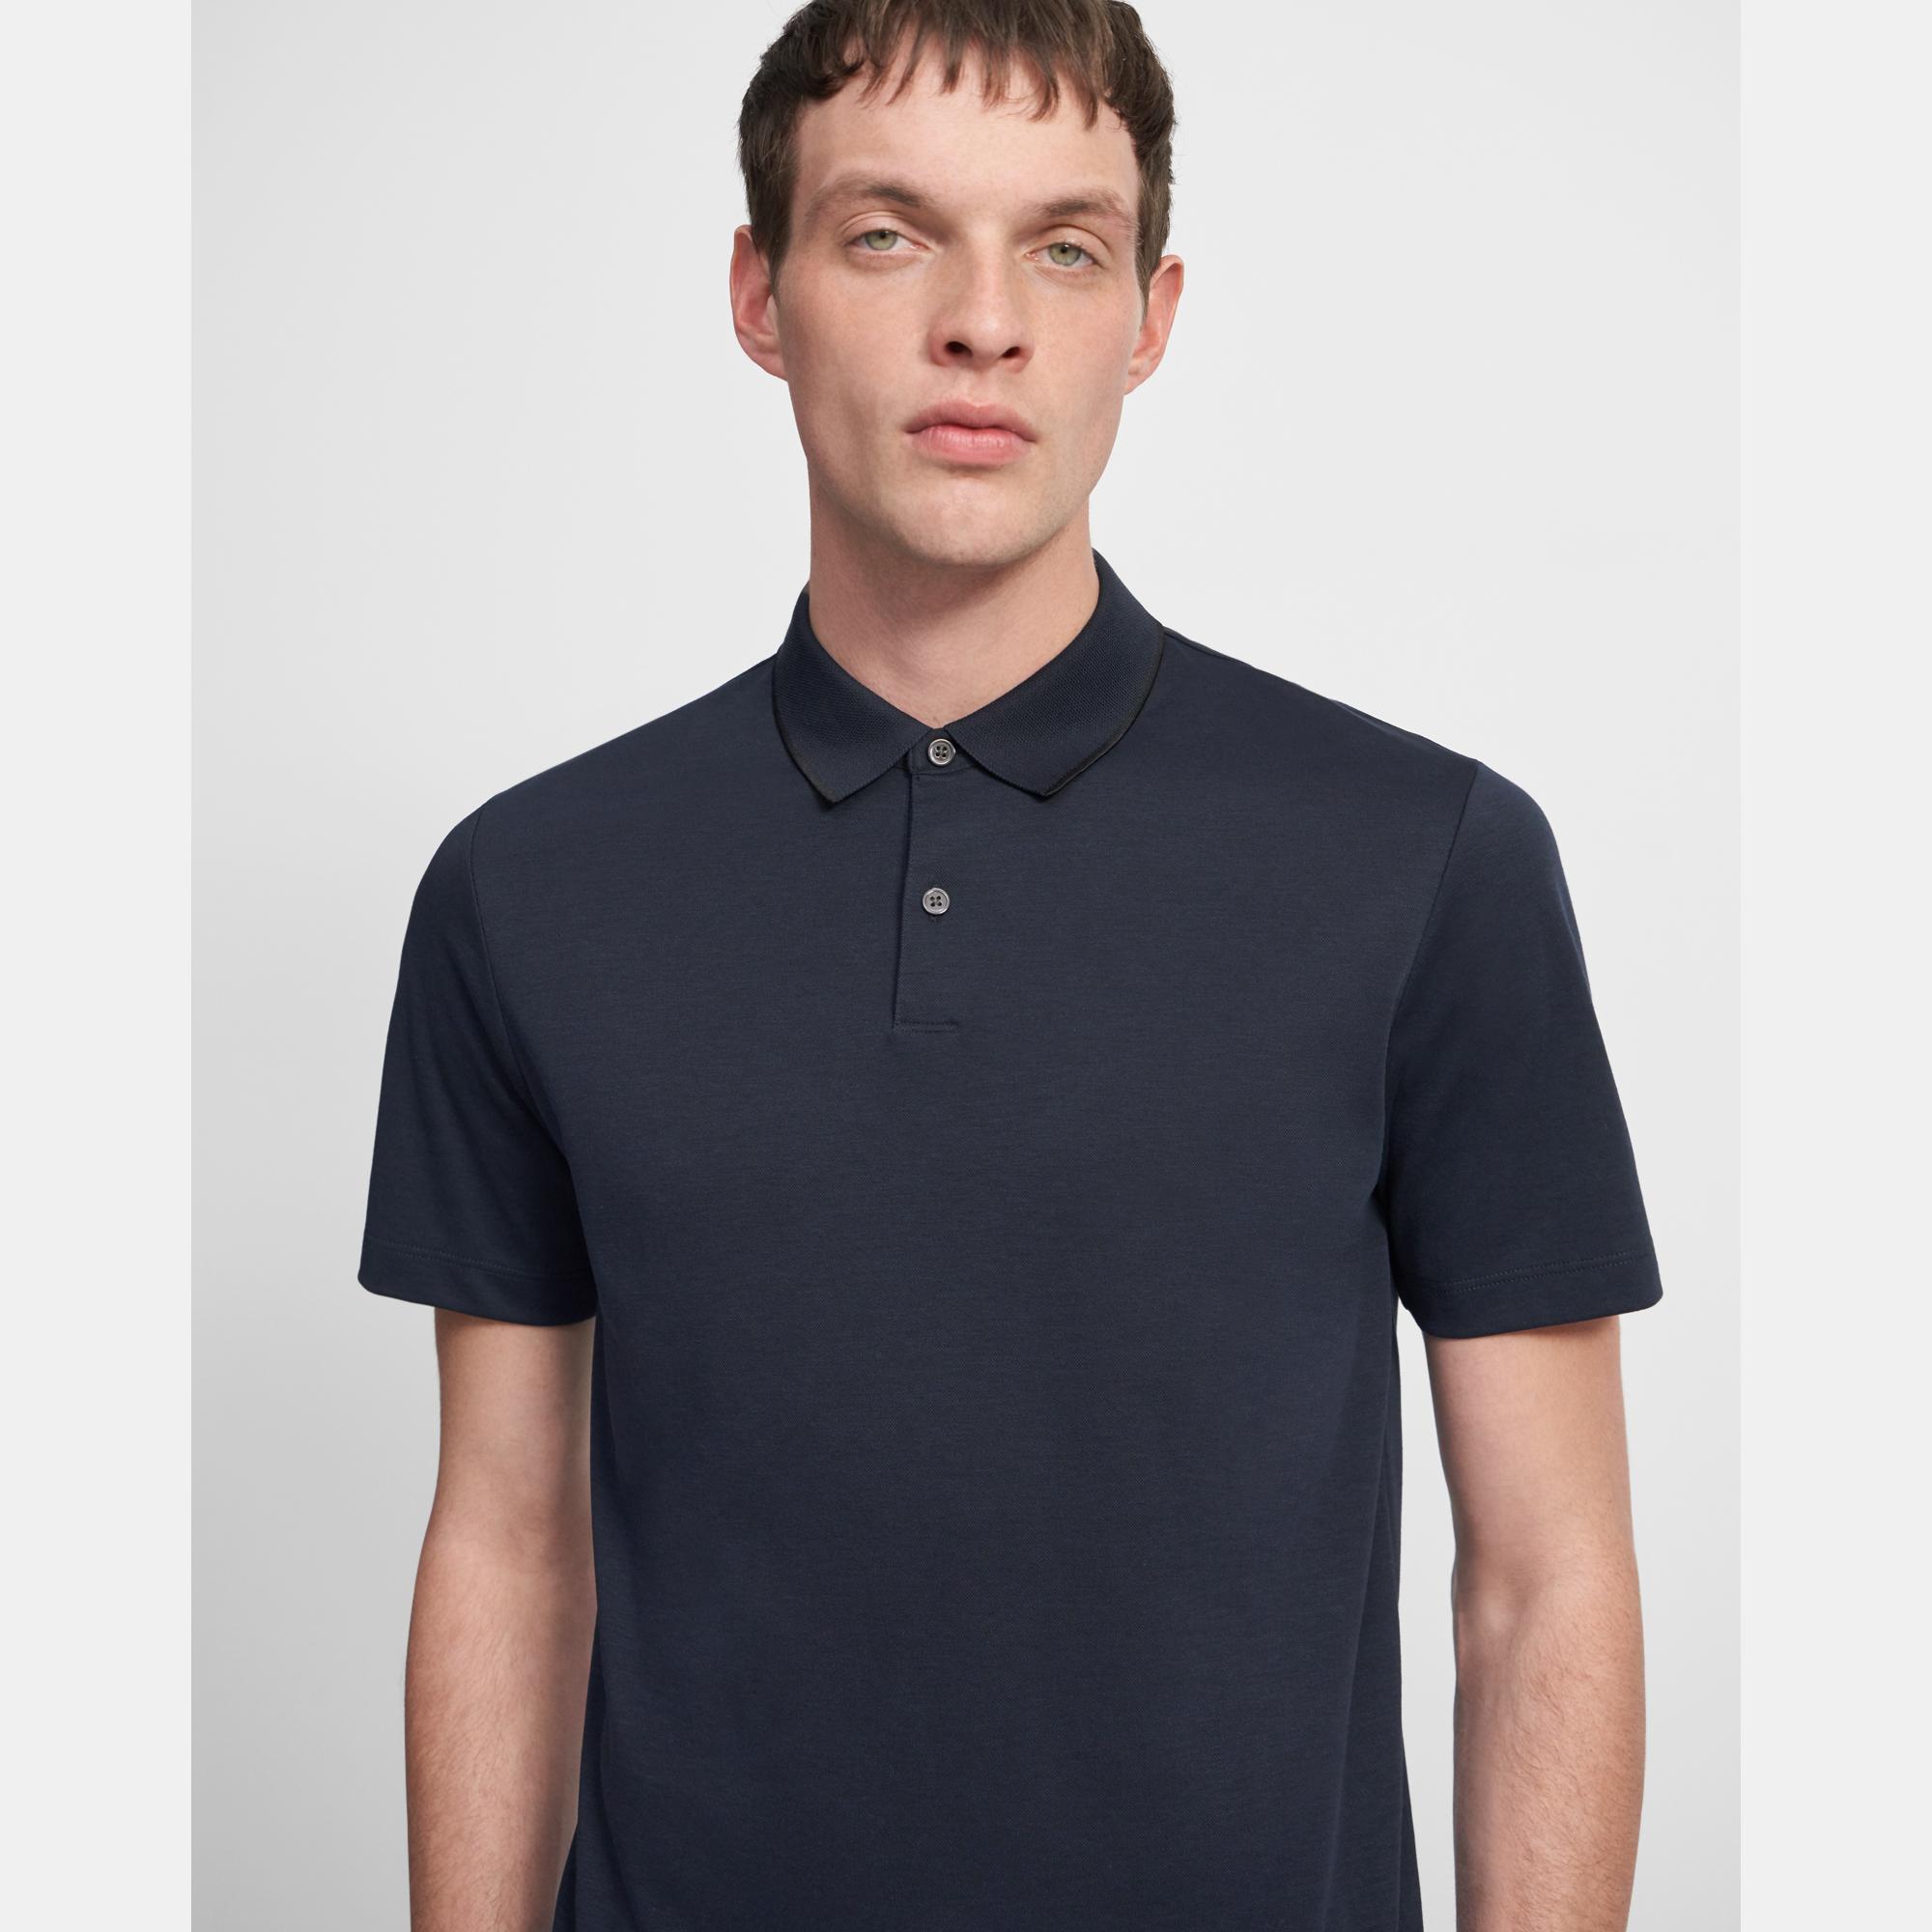 MONARK BASICS - A polo shirt in our signature cotton pique, designed with  abstract tipping at the collar and cuffs. Find out more at…